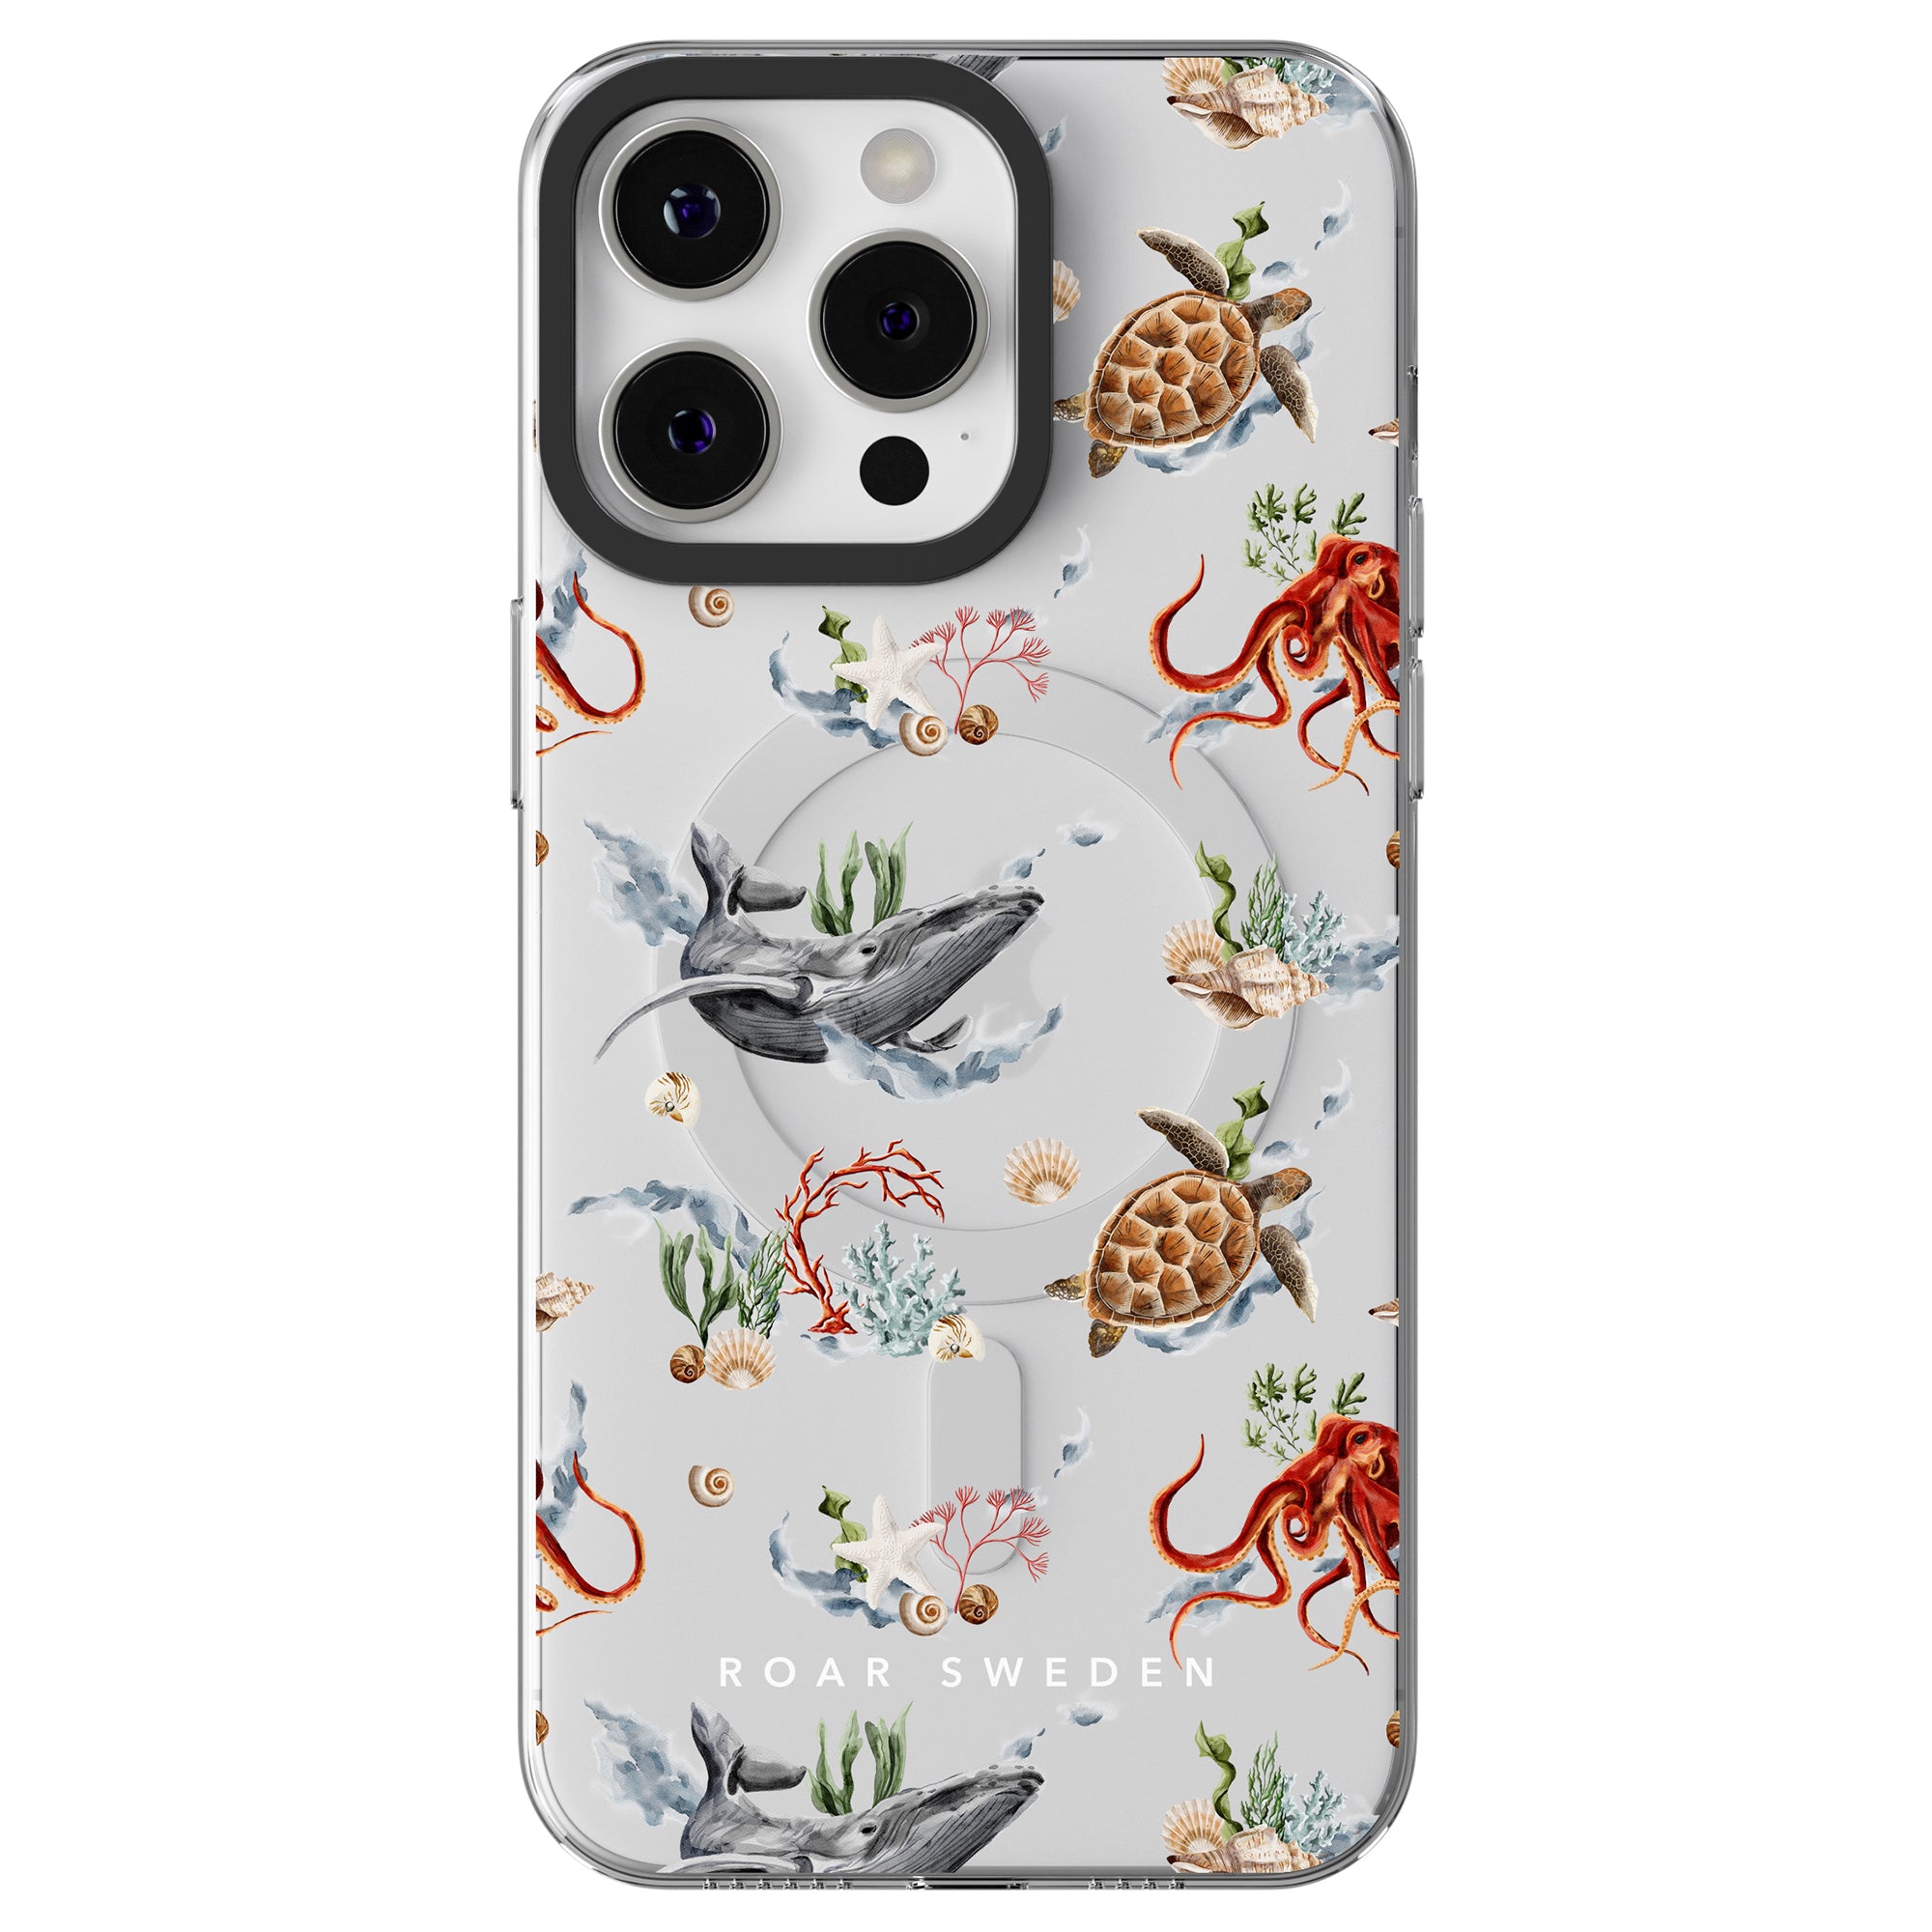 Smartphone case with a marine life design featuring whales, octopuses, turtles, and various sea plants. Part of the Ocean Collection by "Roar Sweden," this Deep - MagSafe ensures both style and functionality.